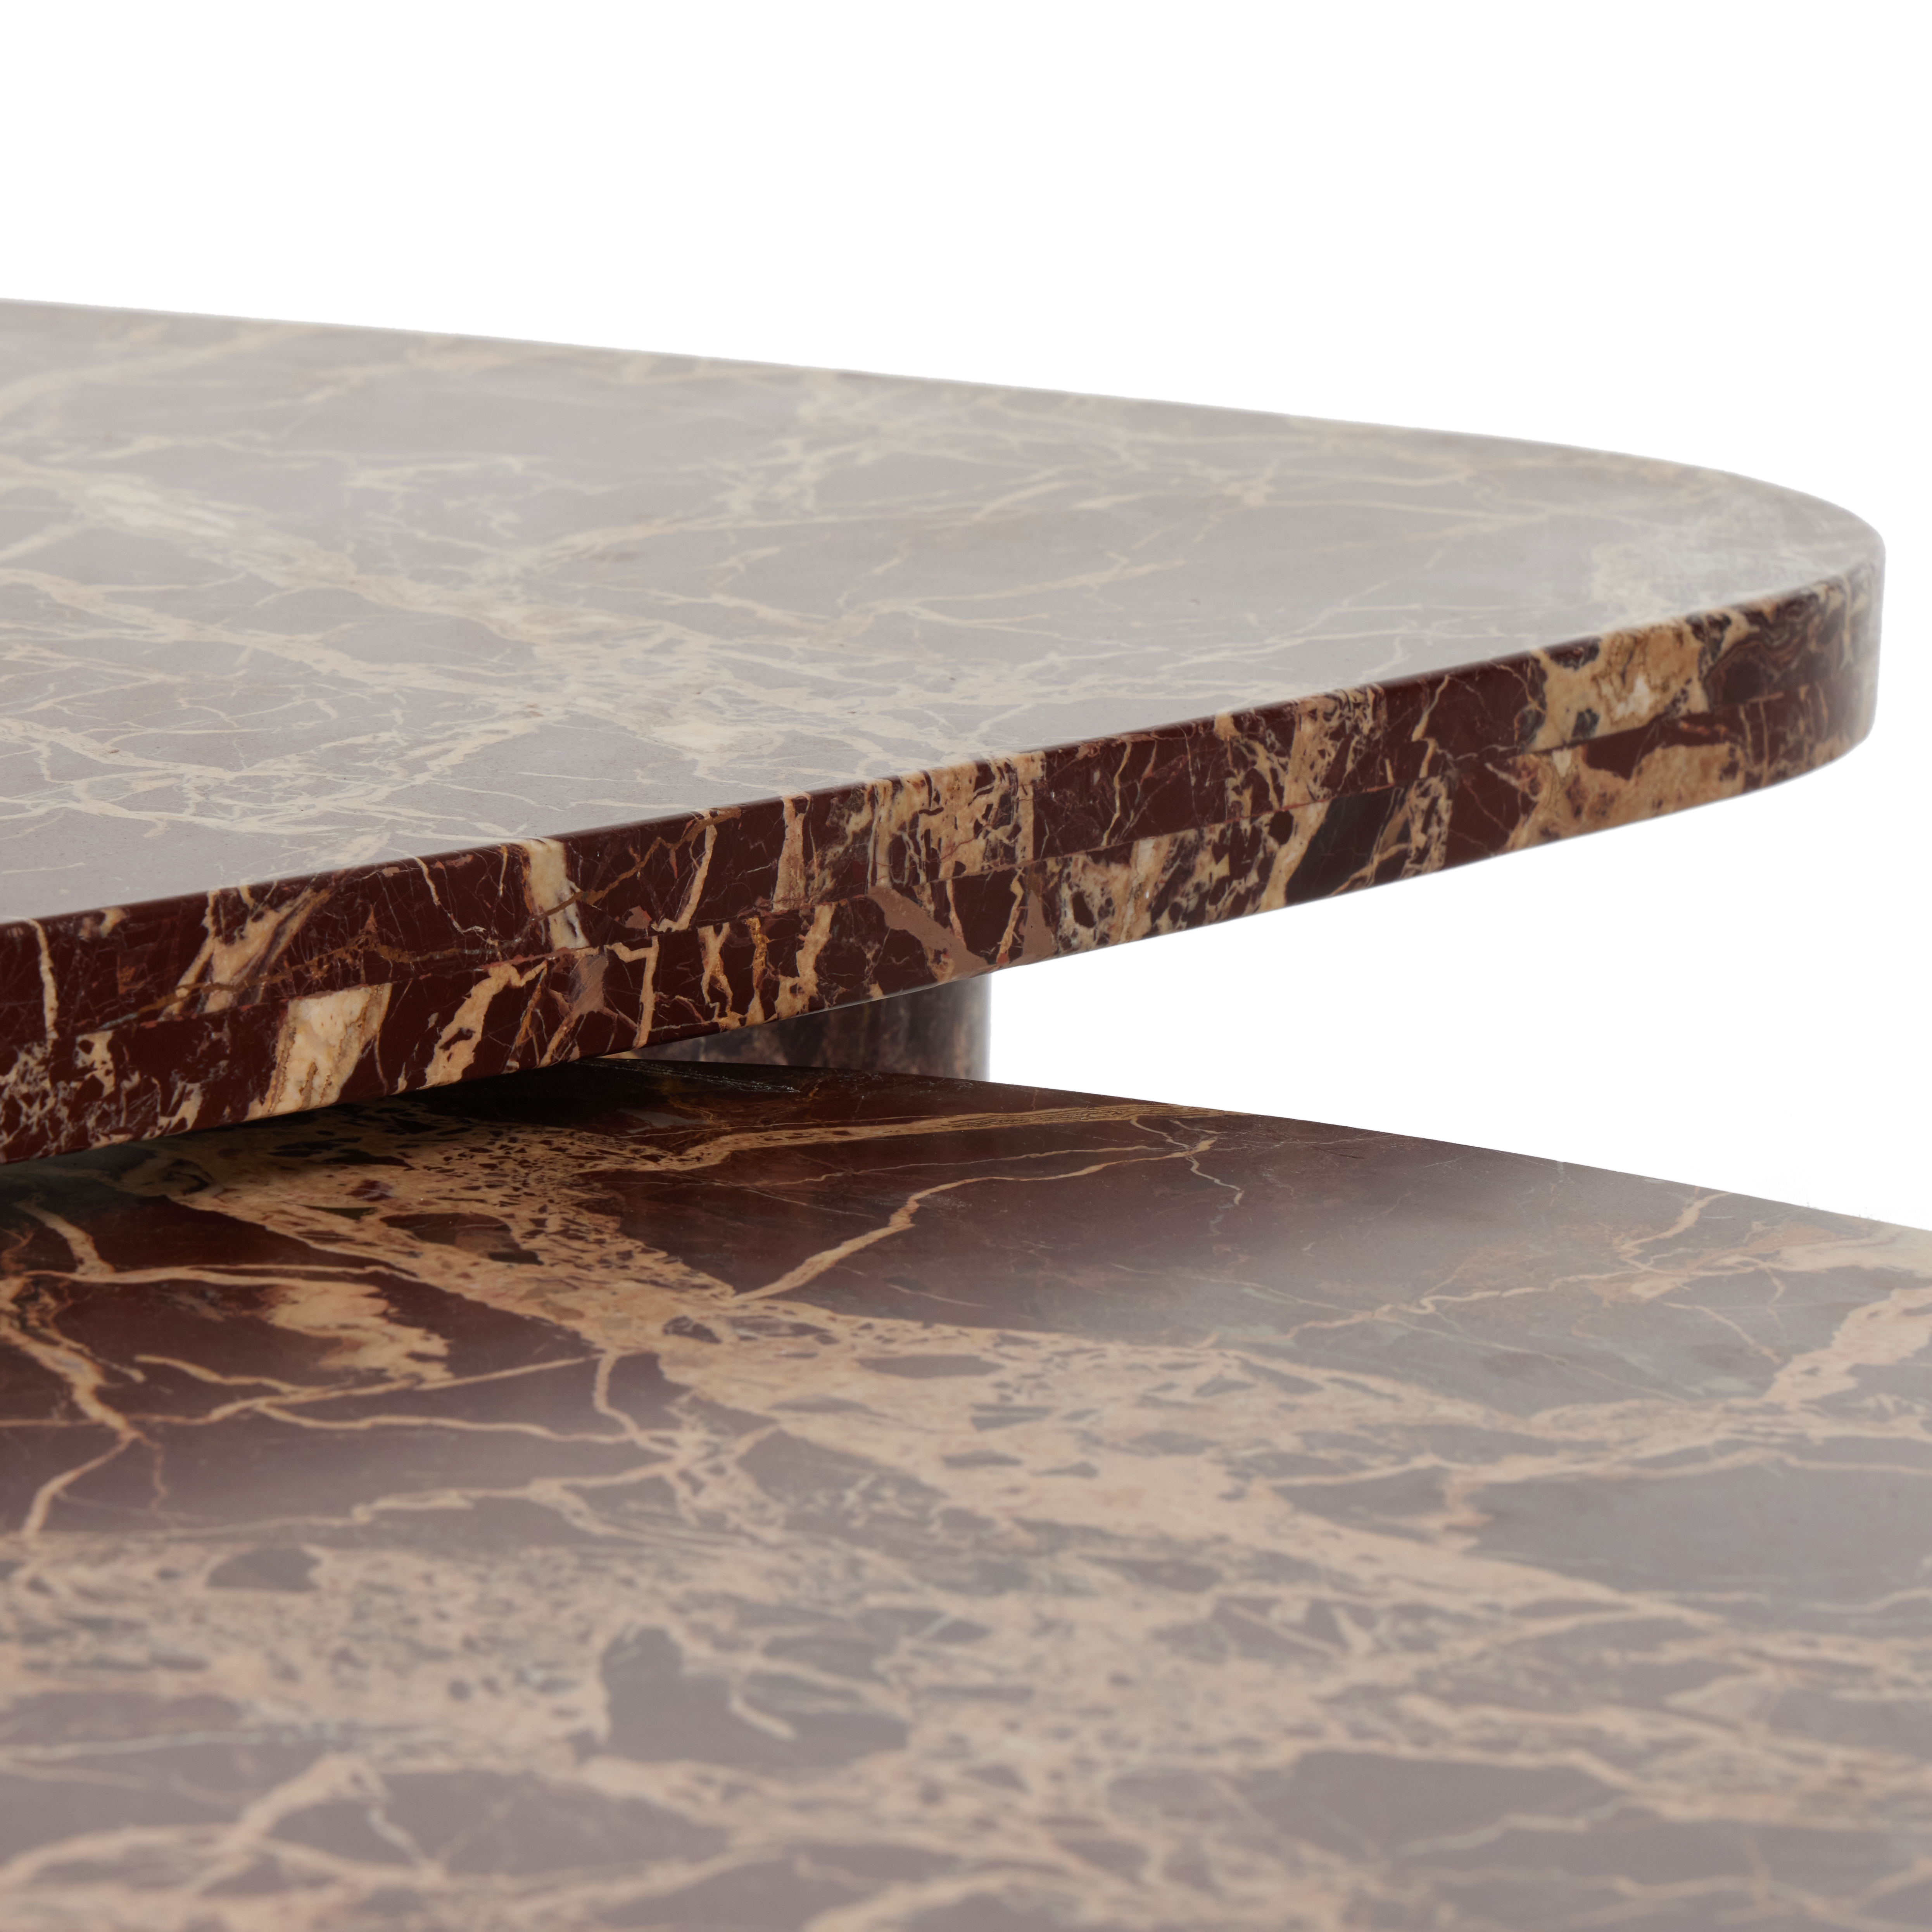 Zion Coffee Table Set-Merlot Marble - Image 5